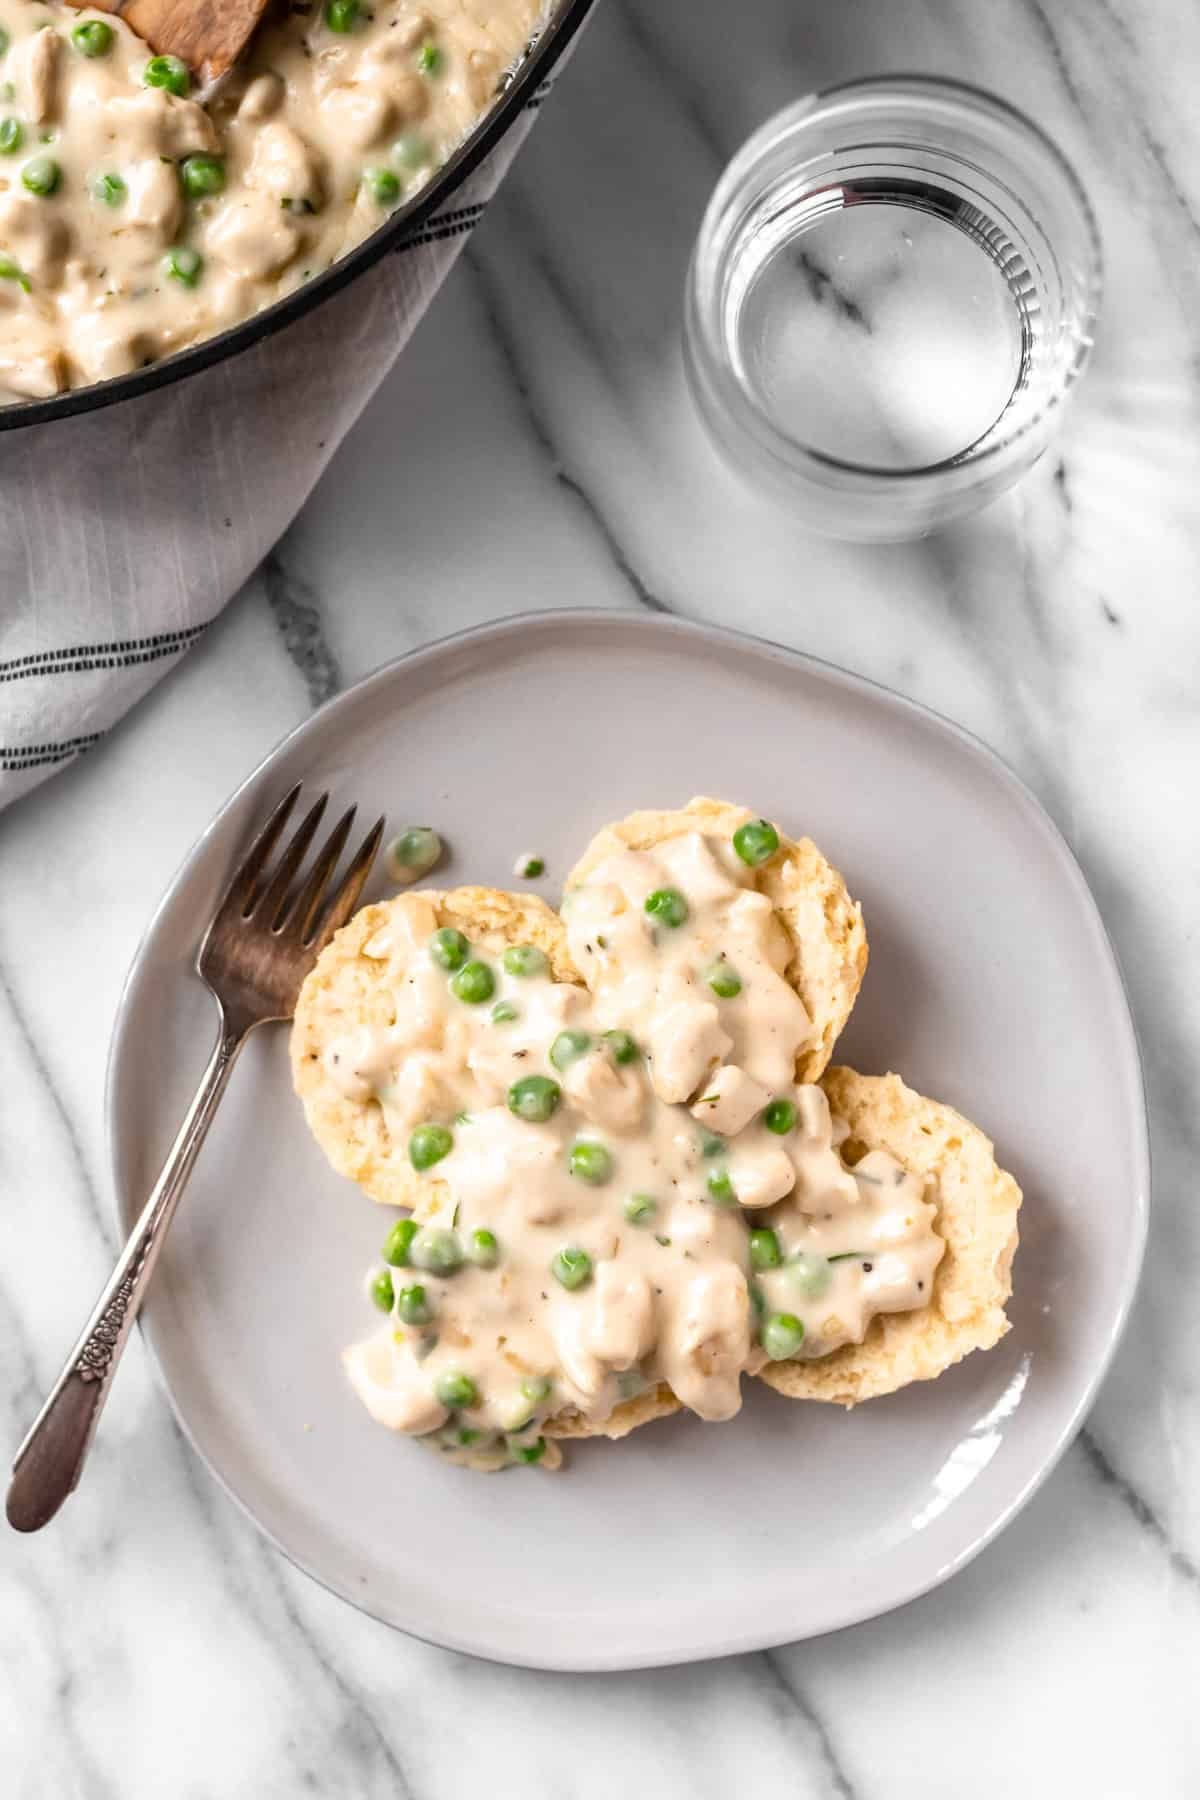 Delicious creamed chicken over biscuits on a gray plate with a fork.